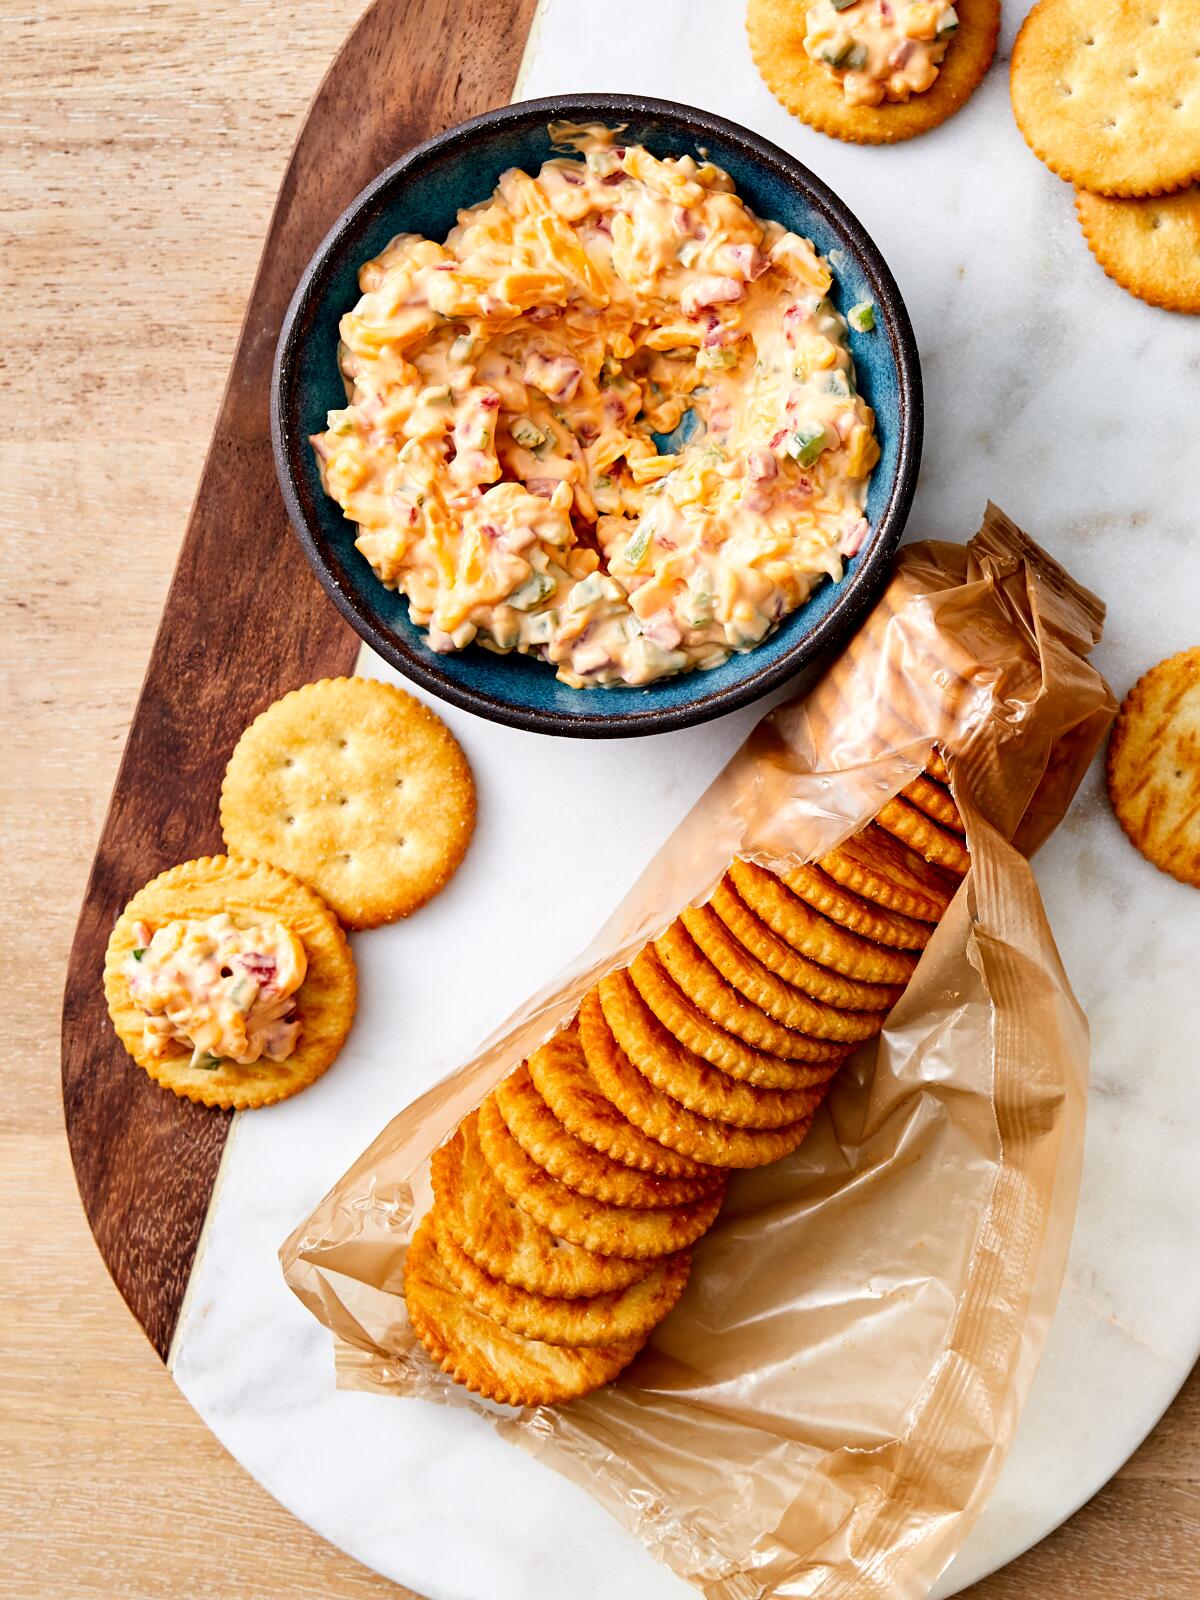 Spicy pimento cheese is the perfect way to start a party.